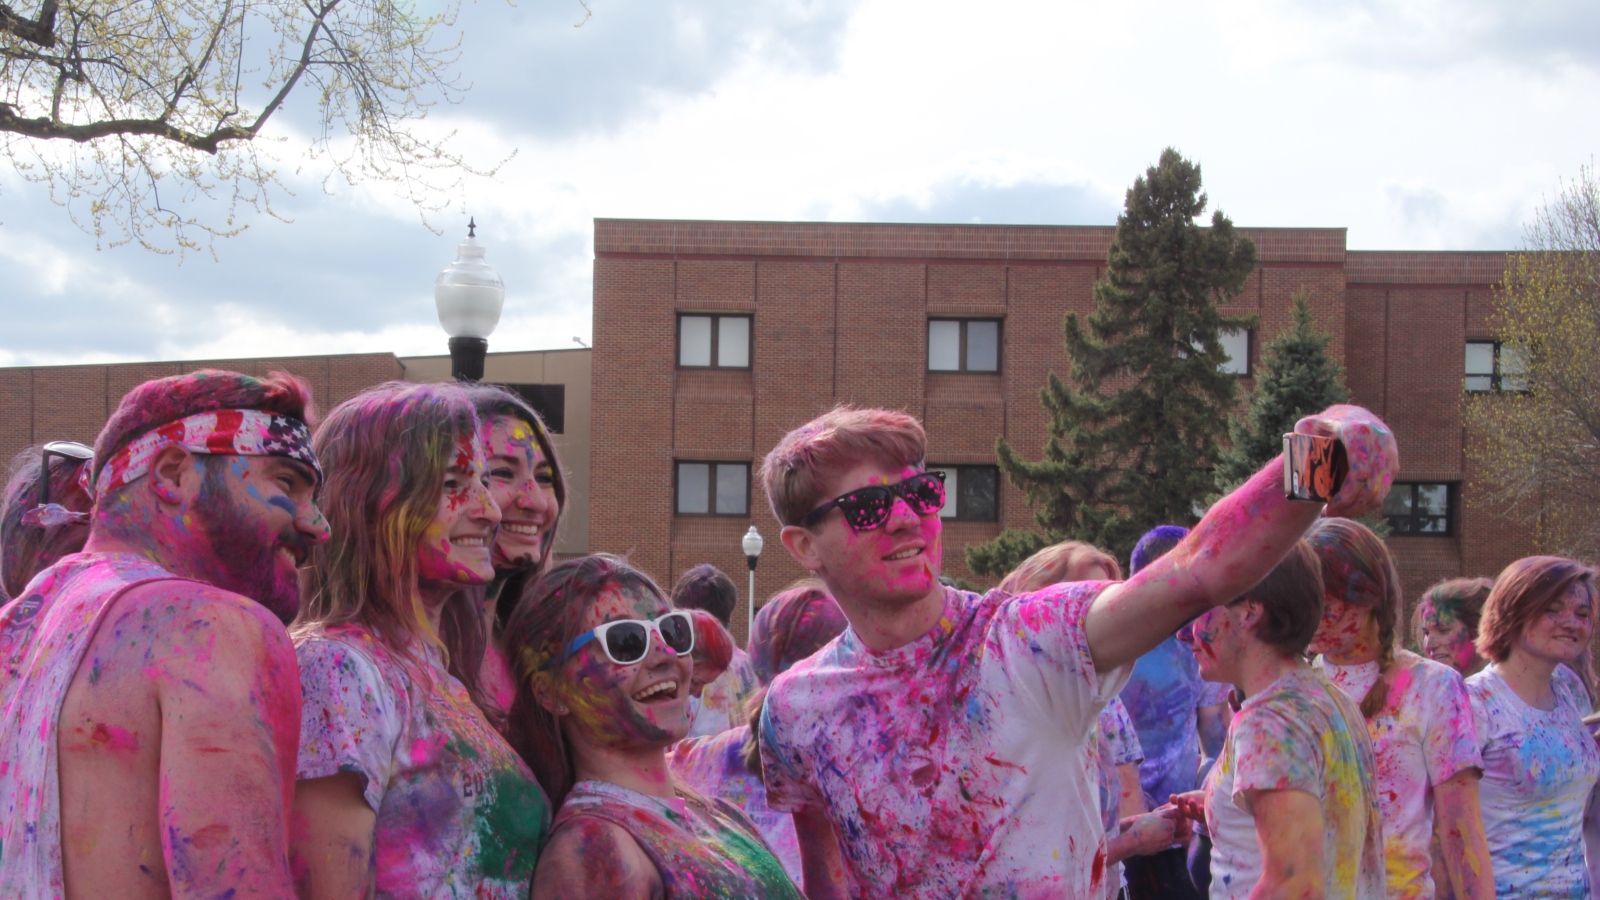 Students celebrate the Hindu holiday, Holi, at a campus event.